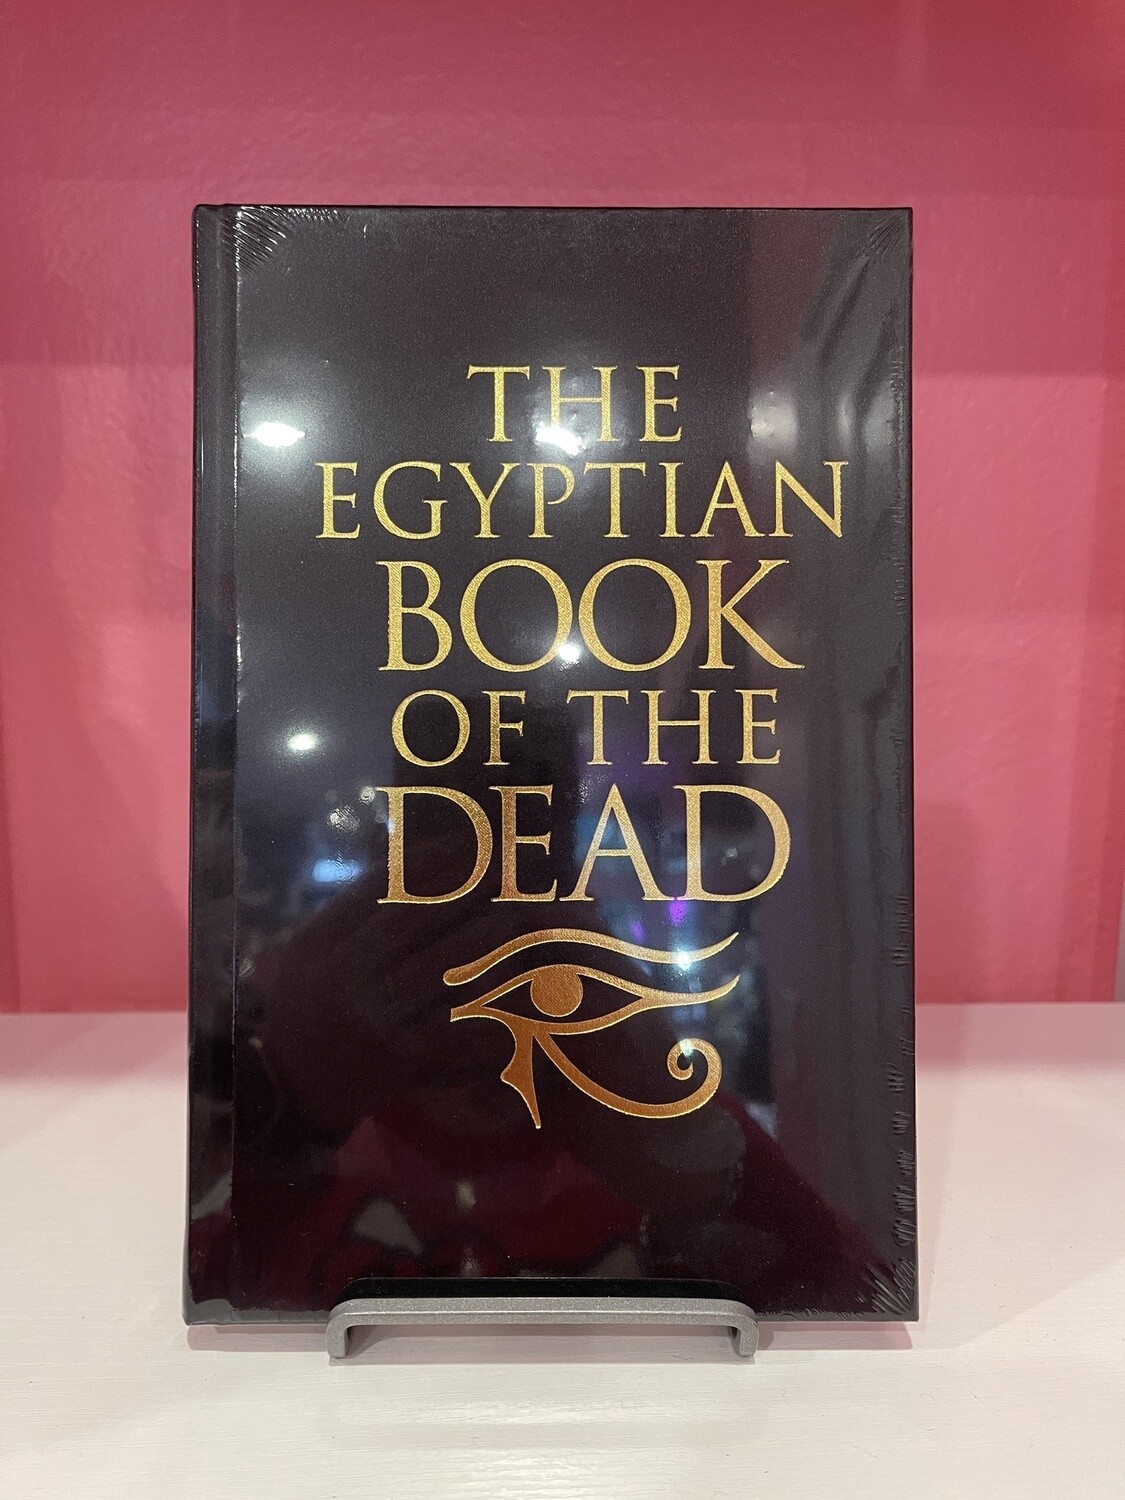 The Egyptian Book of The Dead